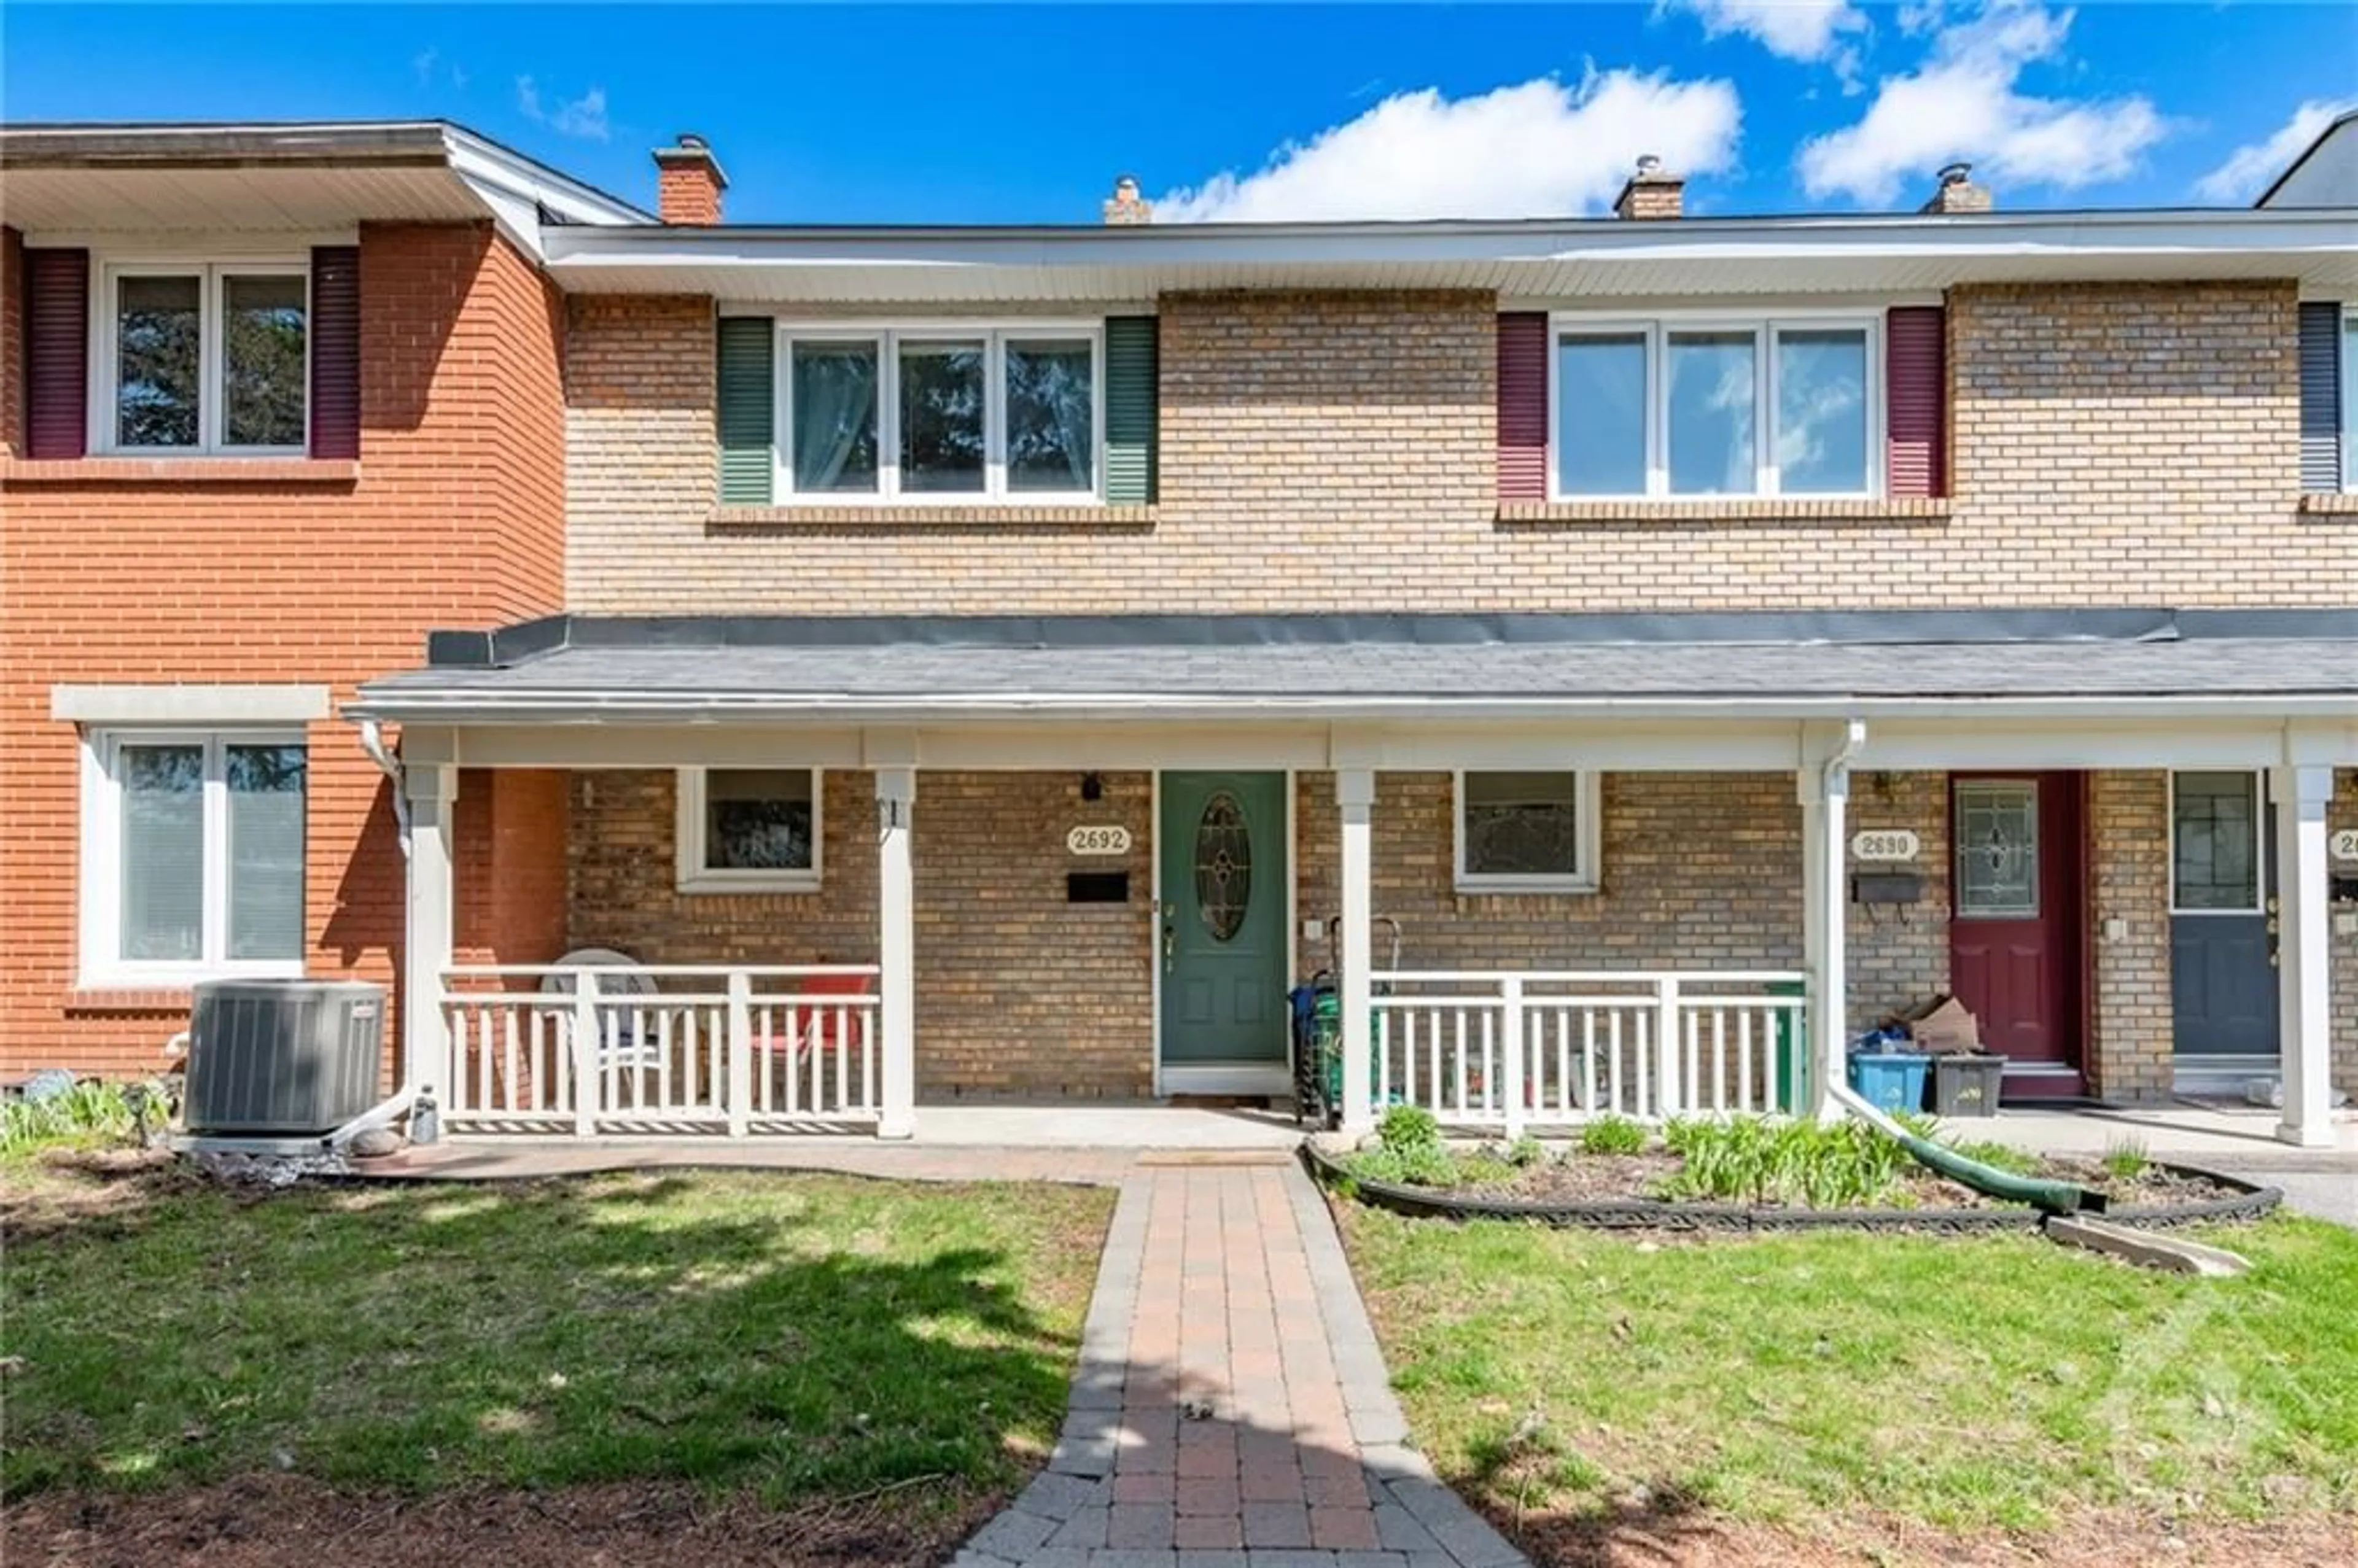 Home with brick exterior material for 2692 DRAPER Ave, Ottawa Ontario K2H 6Z9